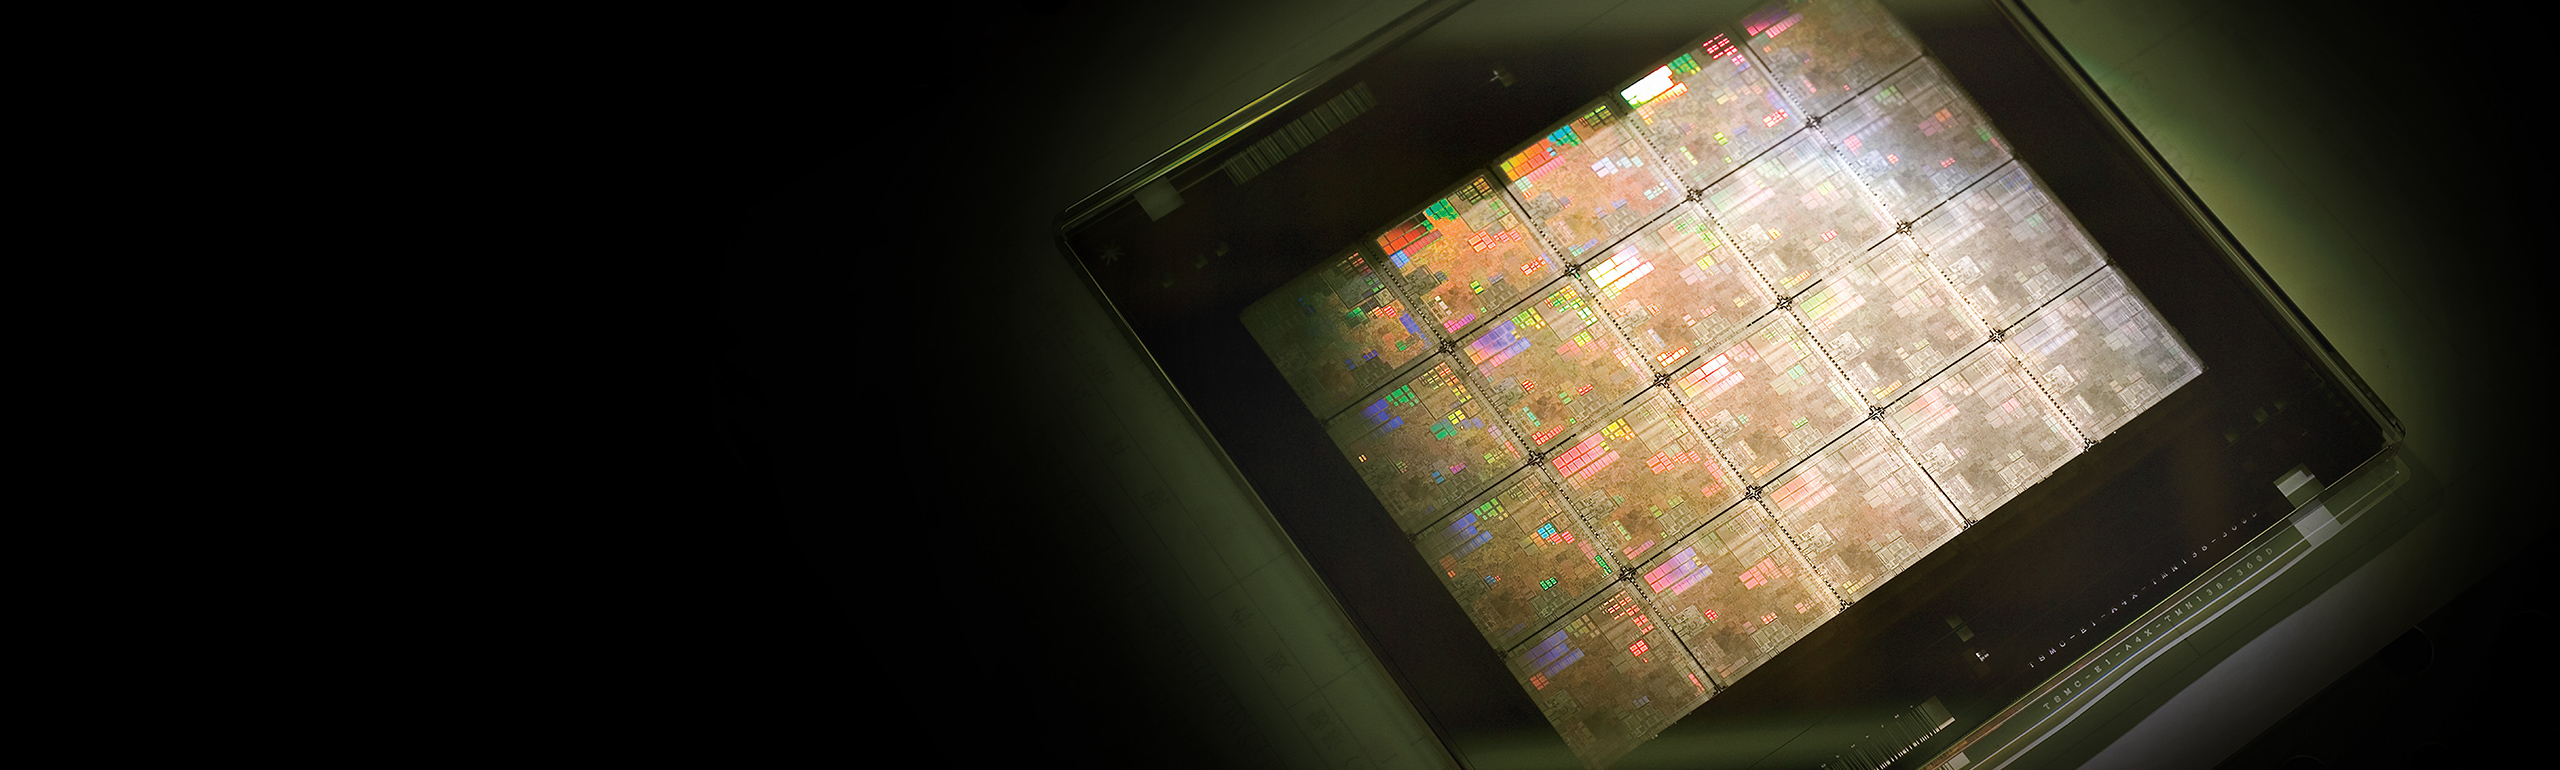 NVIDIA Brings Accelerated Computing to Computational Lithography